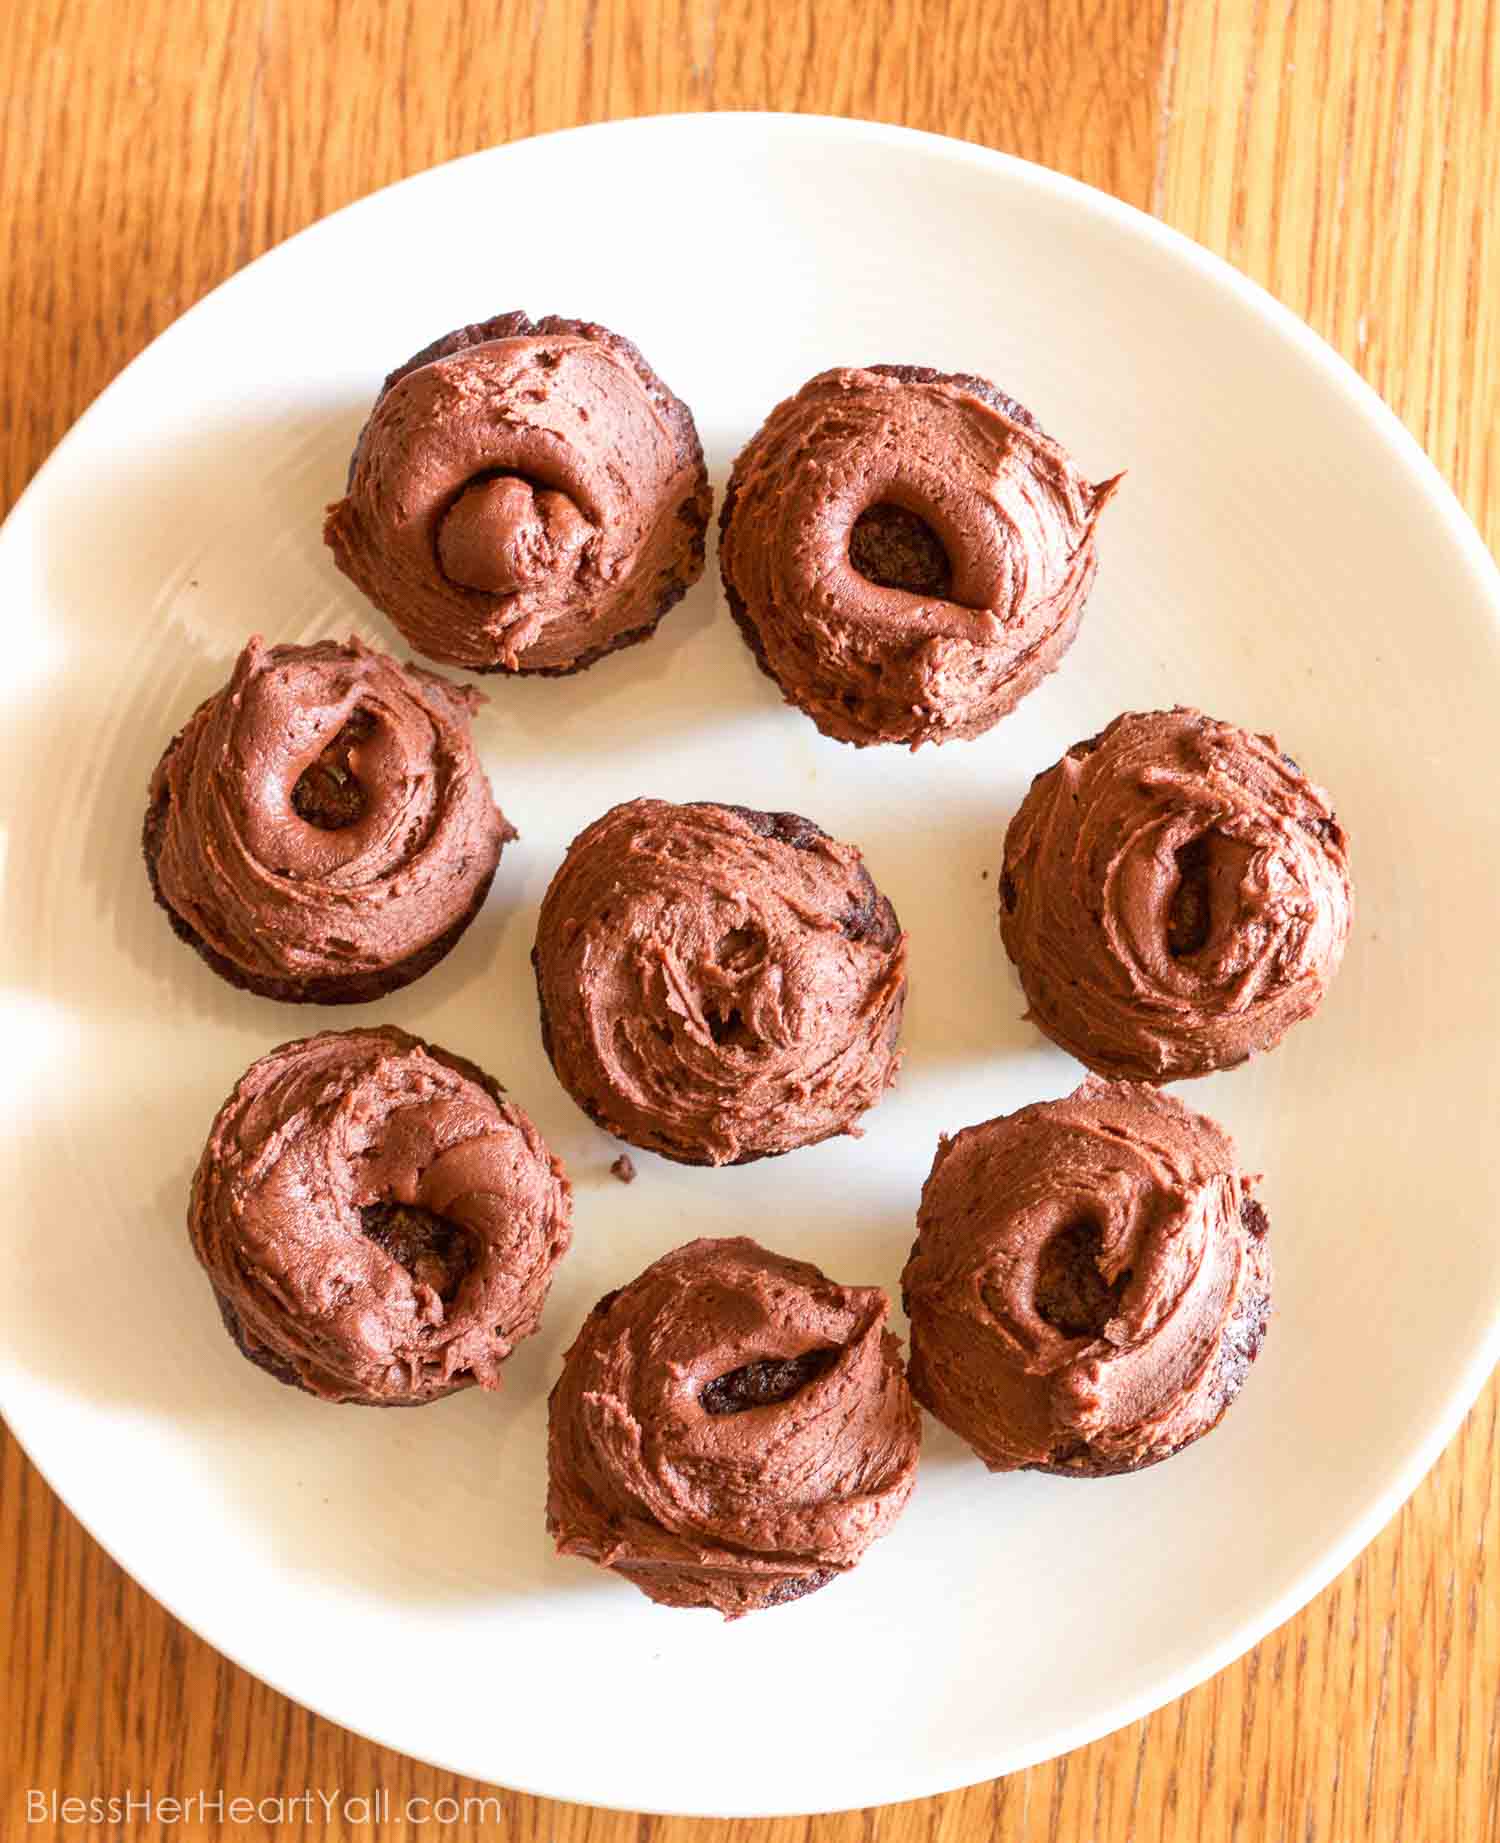 These fluffy and soft made-from-scratch gluten-free german chocolate mini cupcakes are a decadent little sweet treat, perfect for when you need a bite of something full of coconut, chocolate, and creaminess!